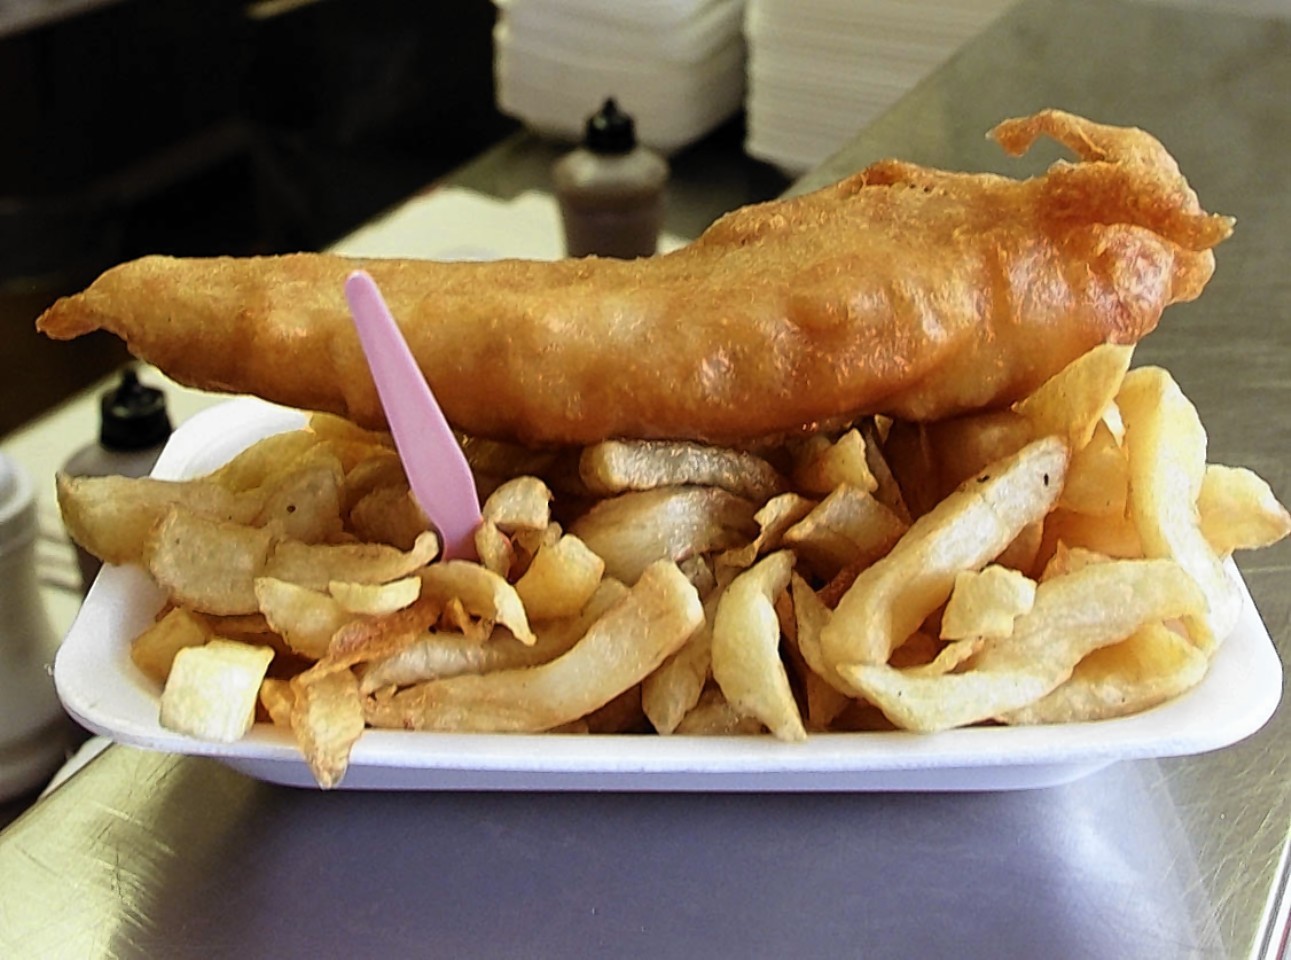 An estimated 28,000 people eat fish and chips every week as part of JD Wetherspoons’ Fish Friday promotion alone